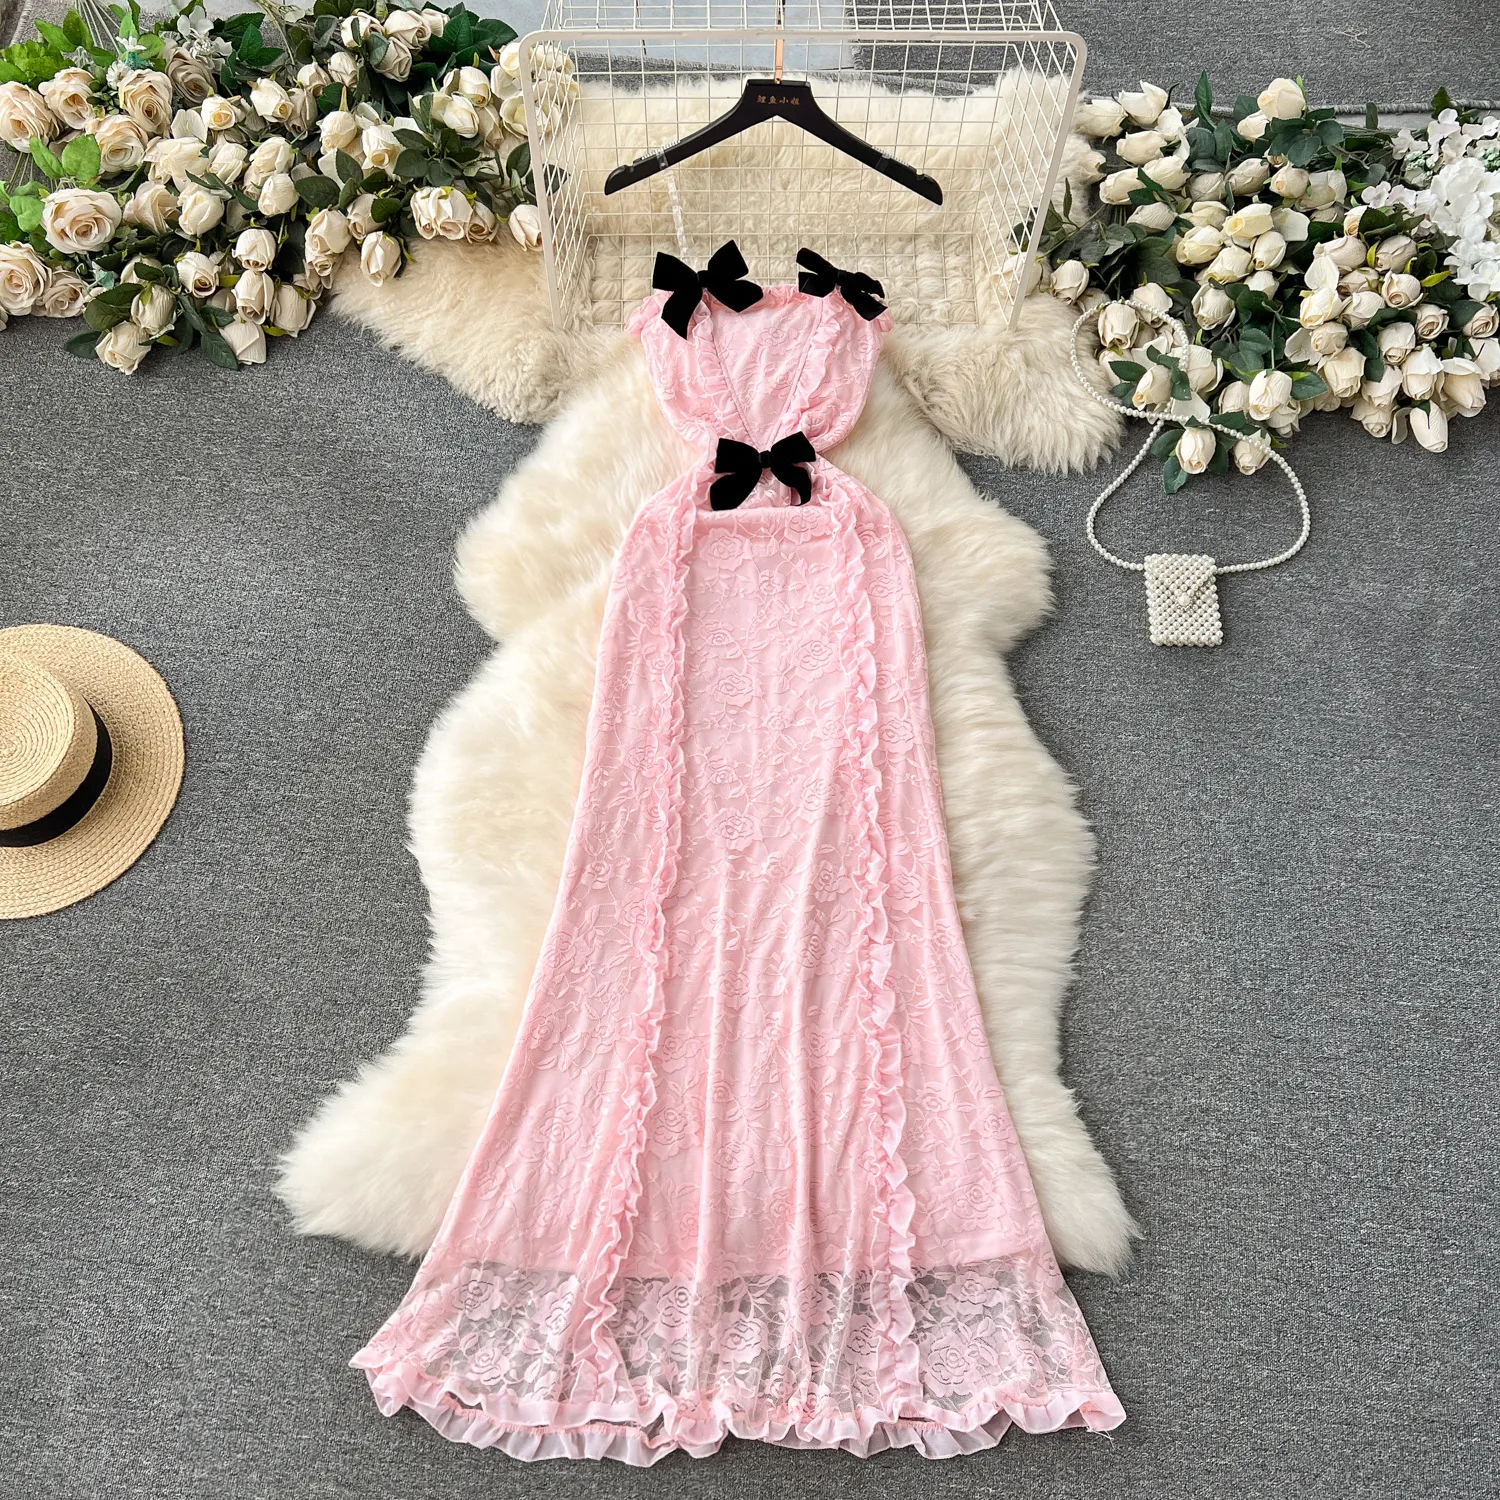 High end socialite style dress with sweet wood ear edge slim fit and long sexy strapless lace dress with bow